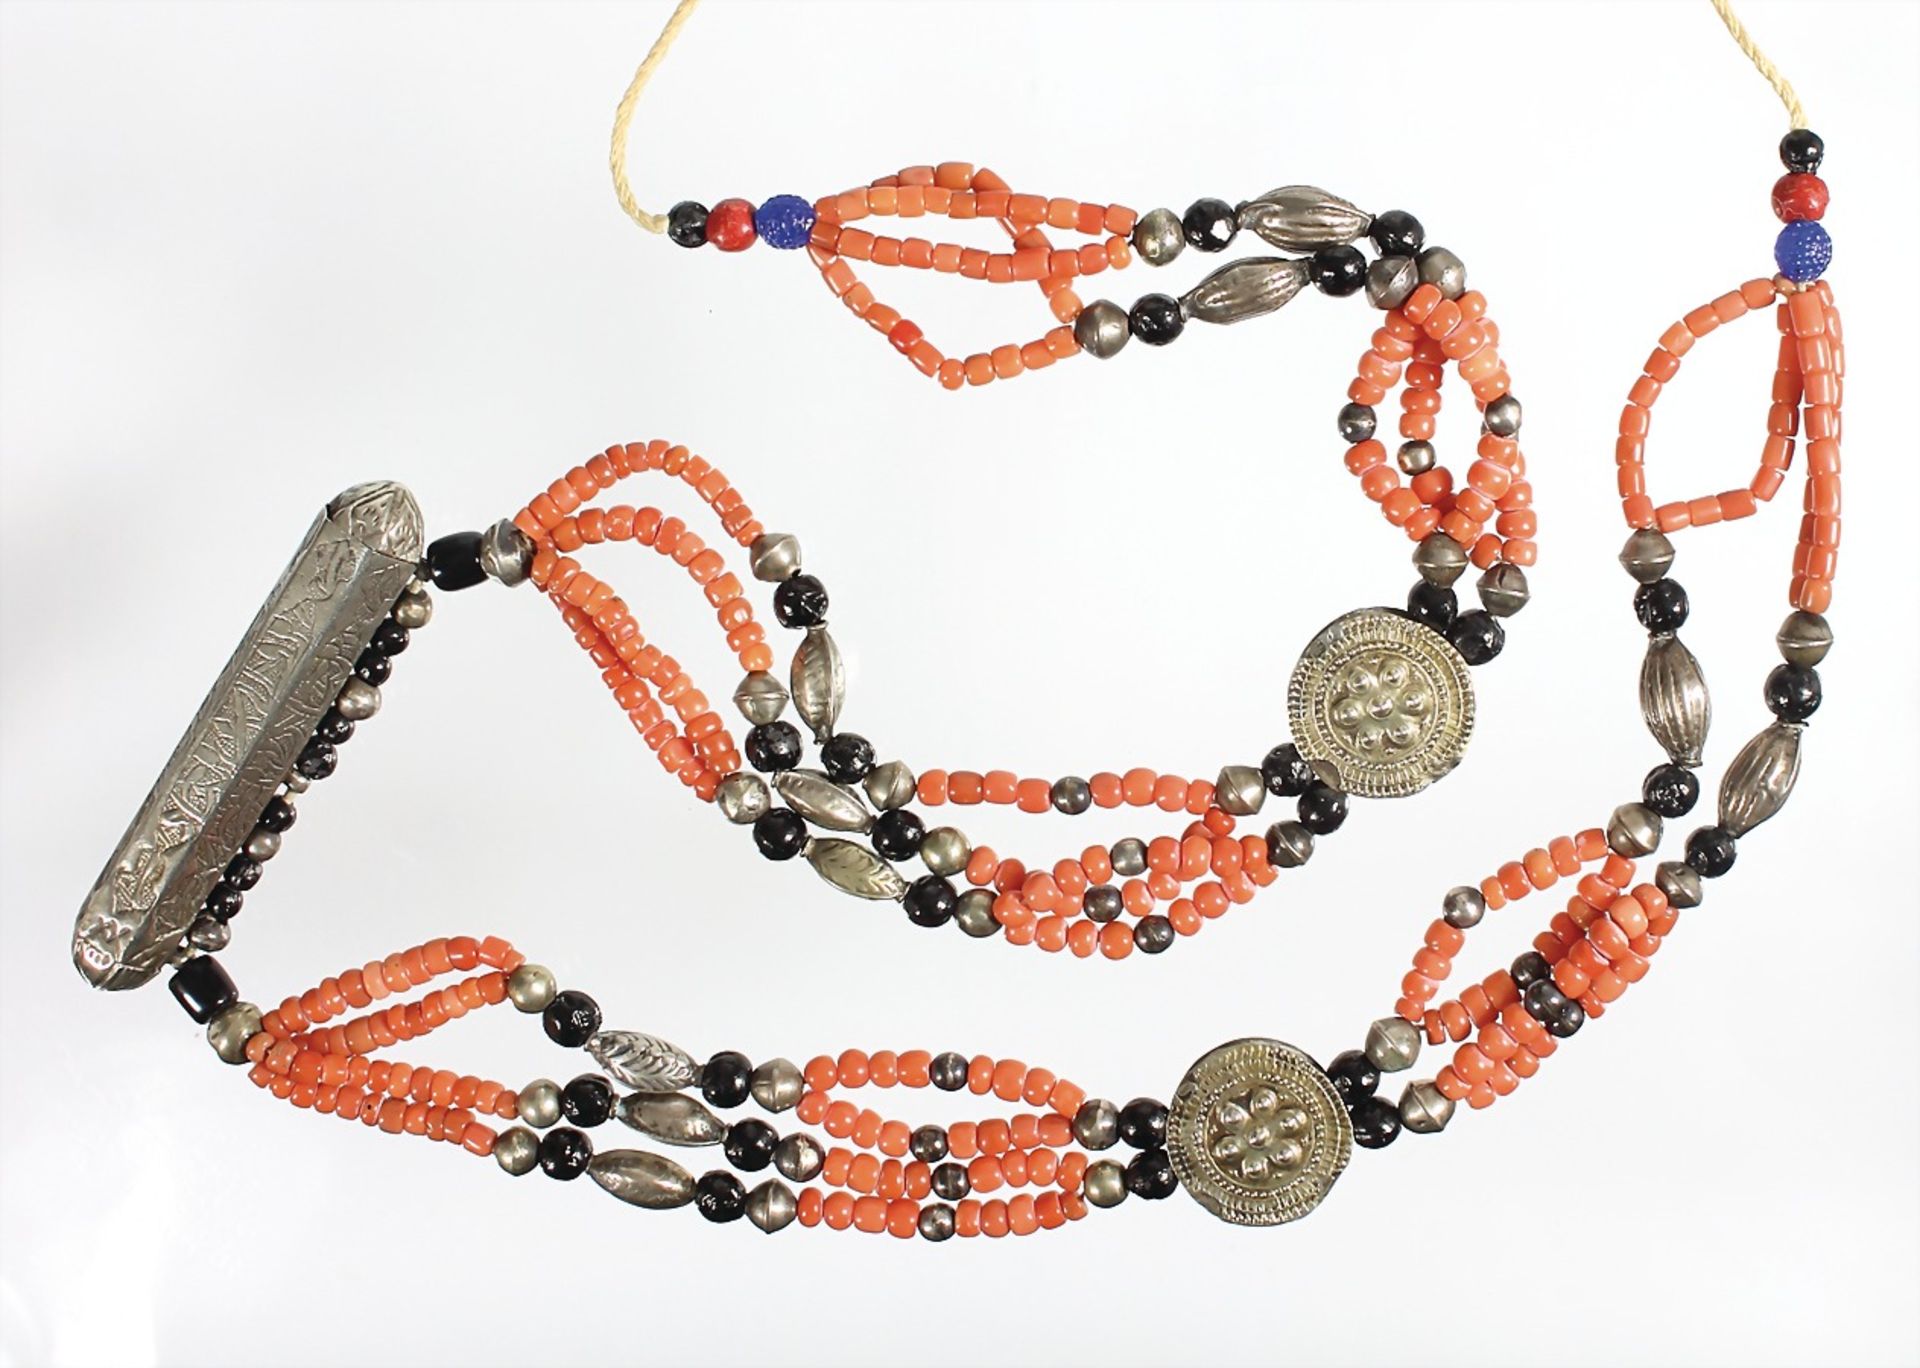 antique Nomad jewellery, Afghanistan ?, multi-row chains made of corals, silver parts and black seed